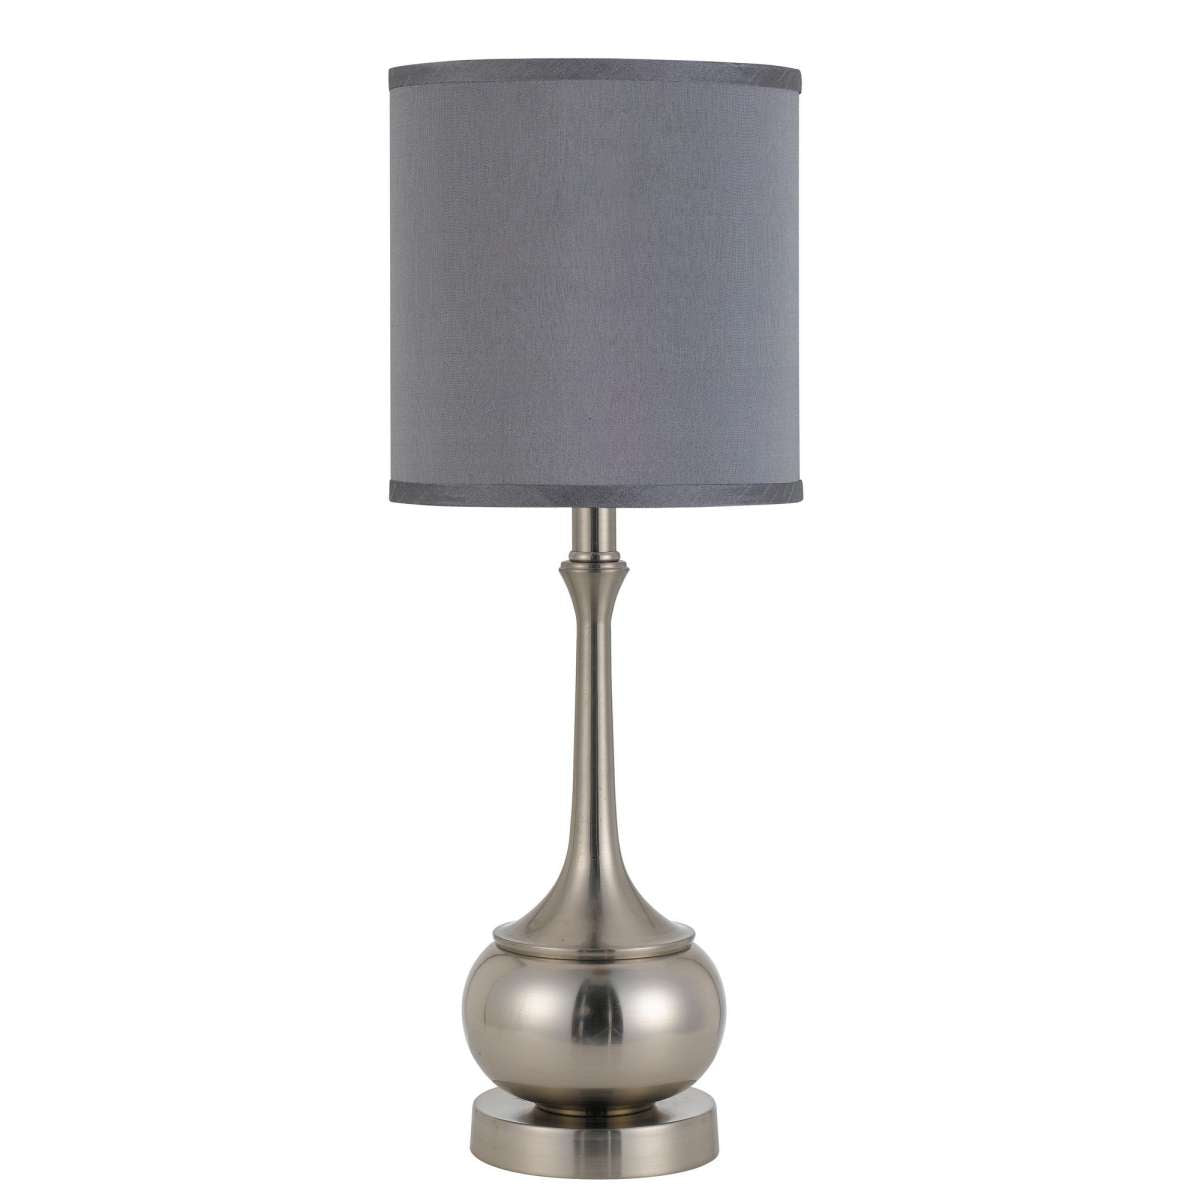 Elongated Bellied Shape Metal Accent Lamp With Drum Shade, Silver By Benzara